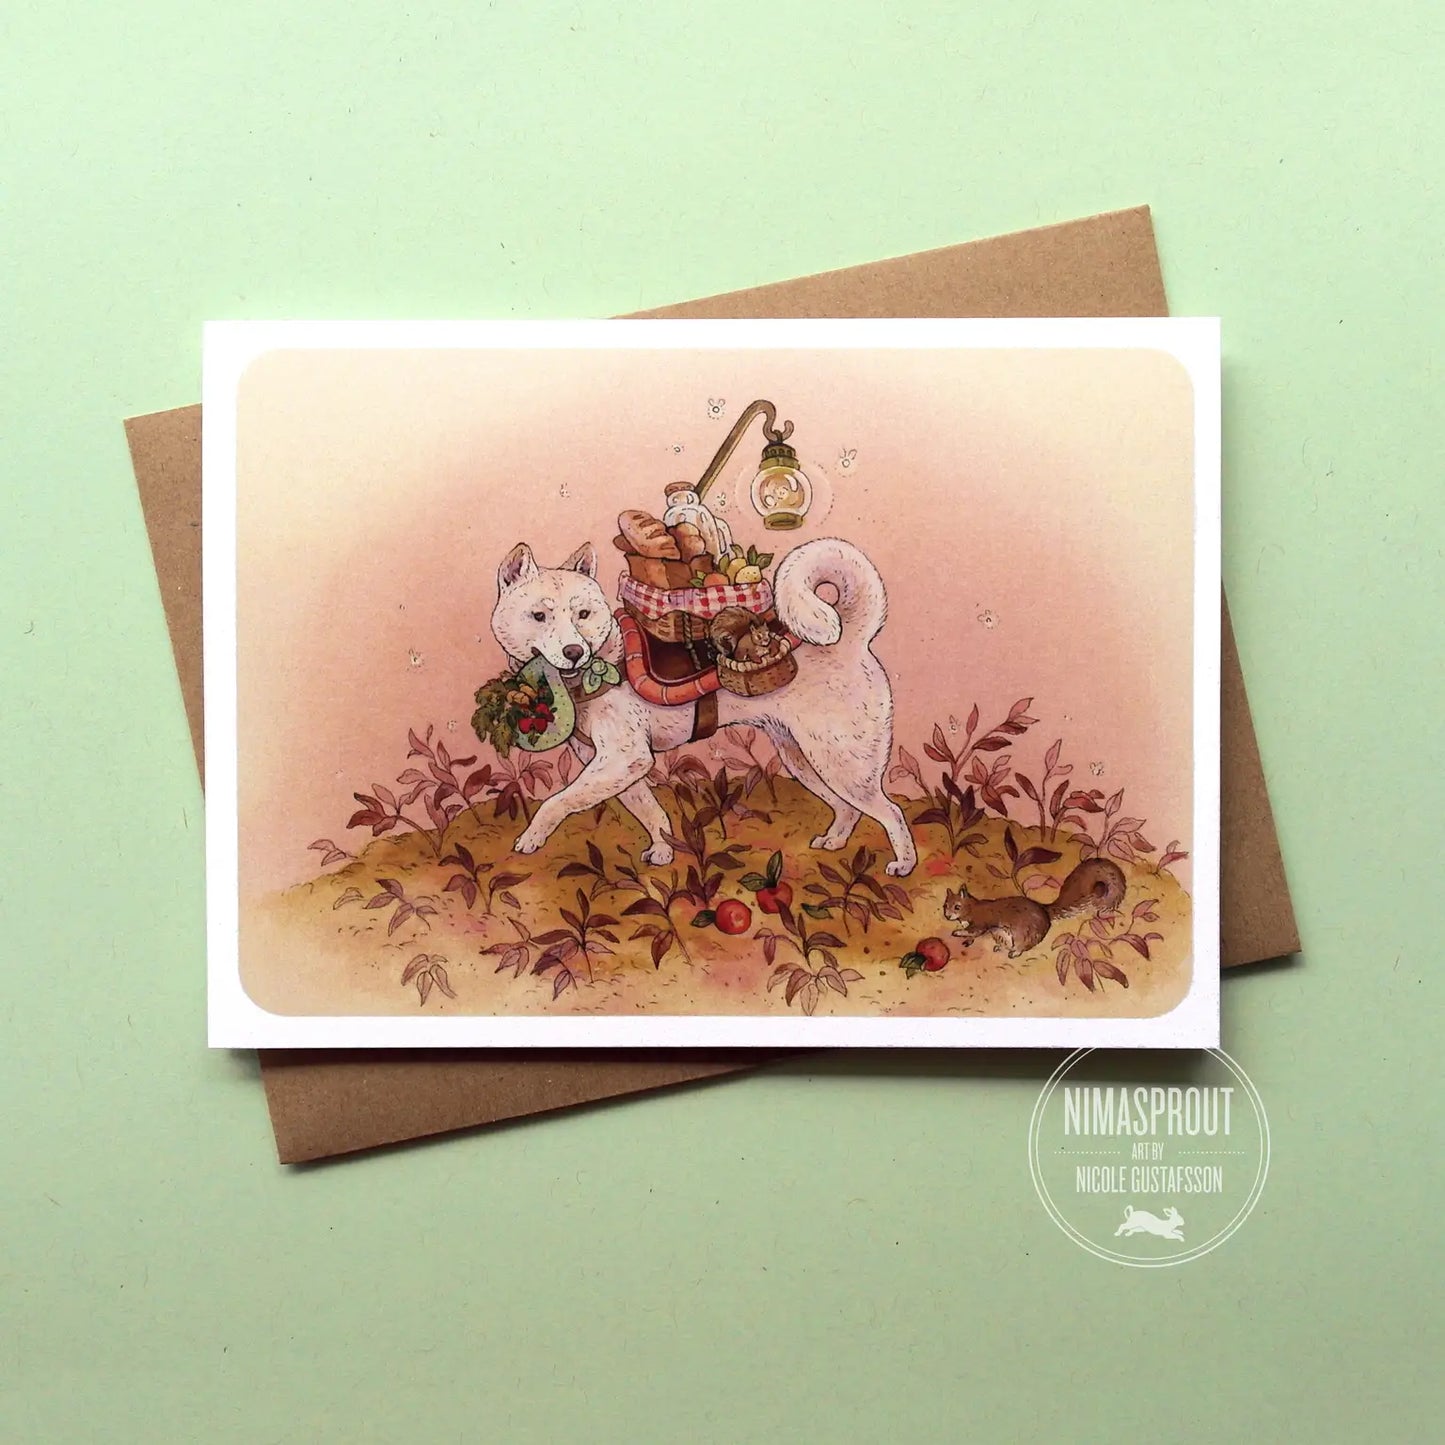 SHIBA Greeting Card from Nimasprout, The Olde Curiosity Shoppe